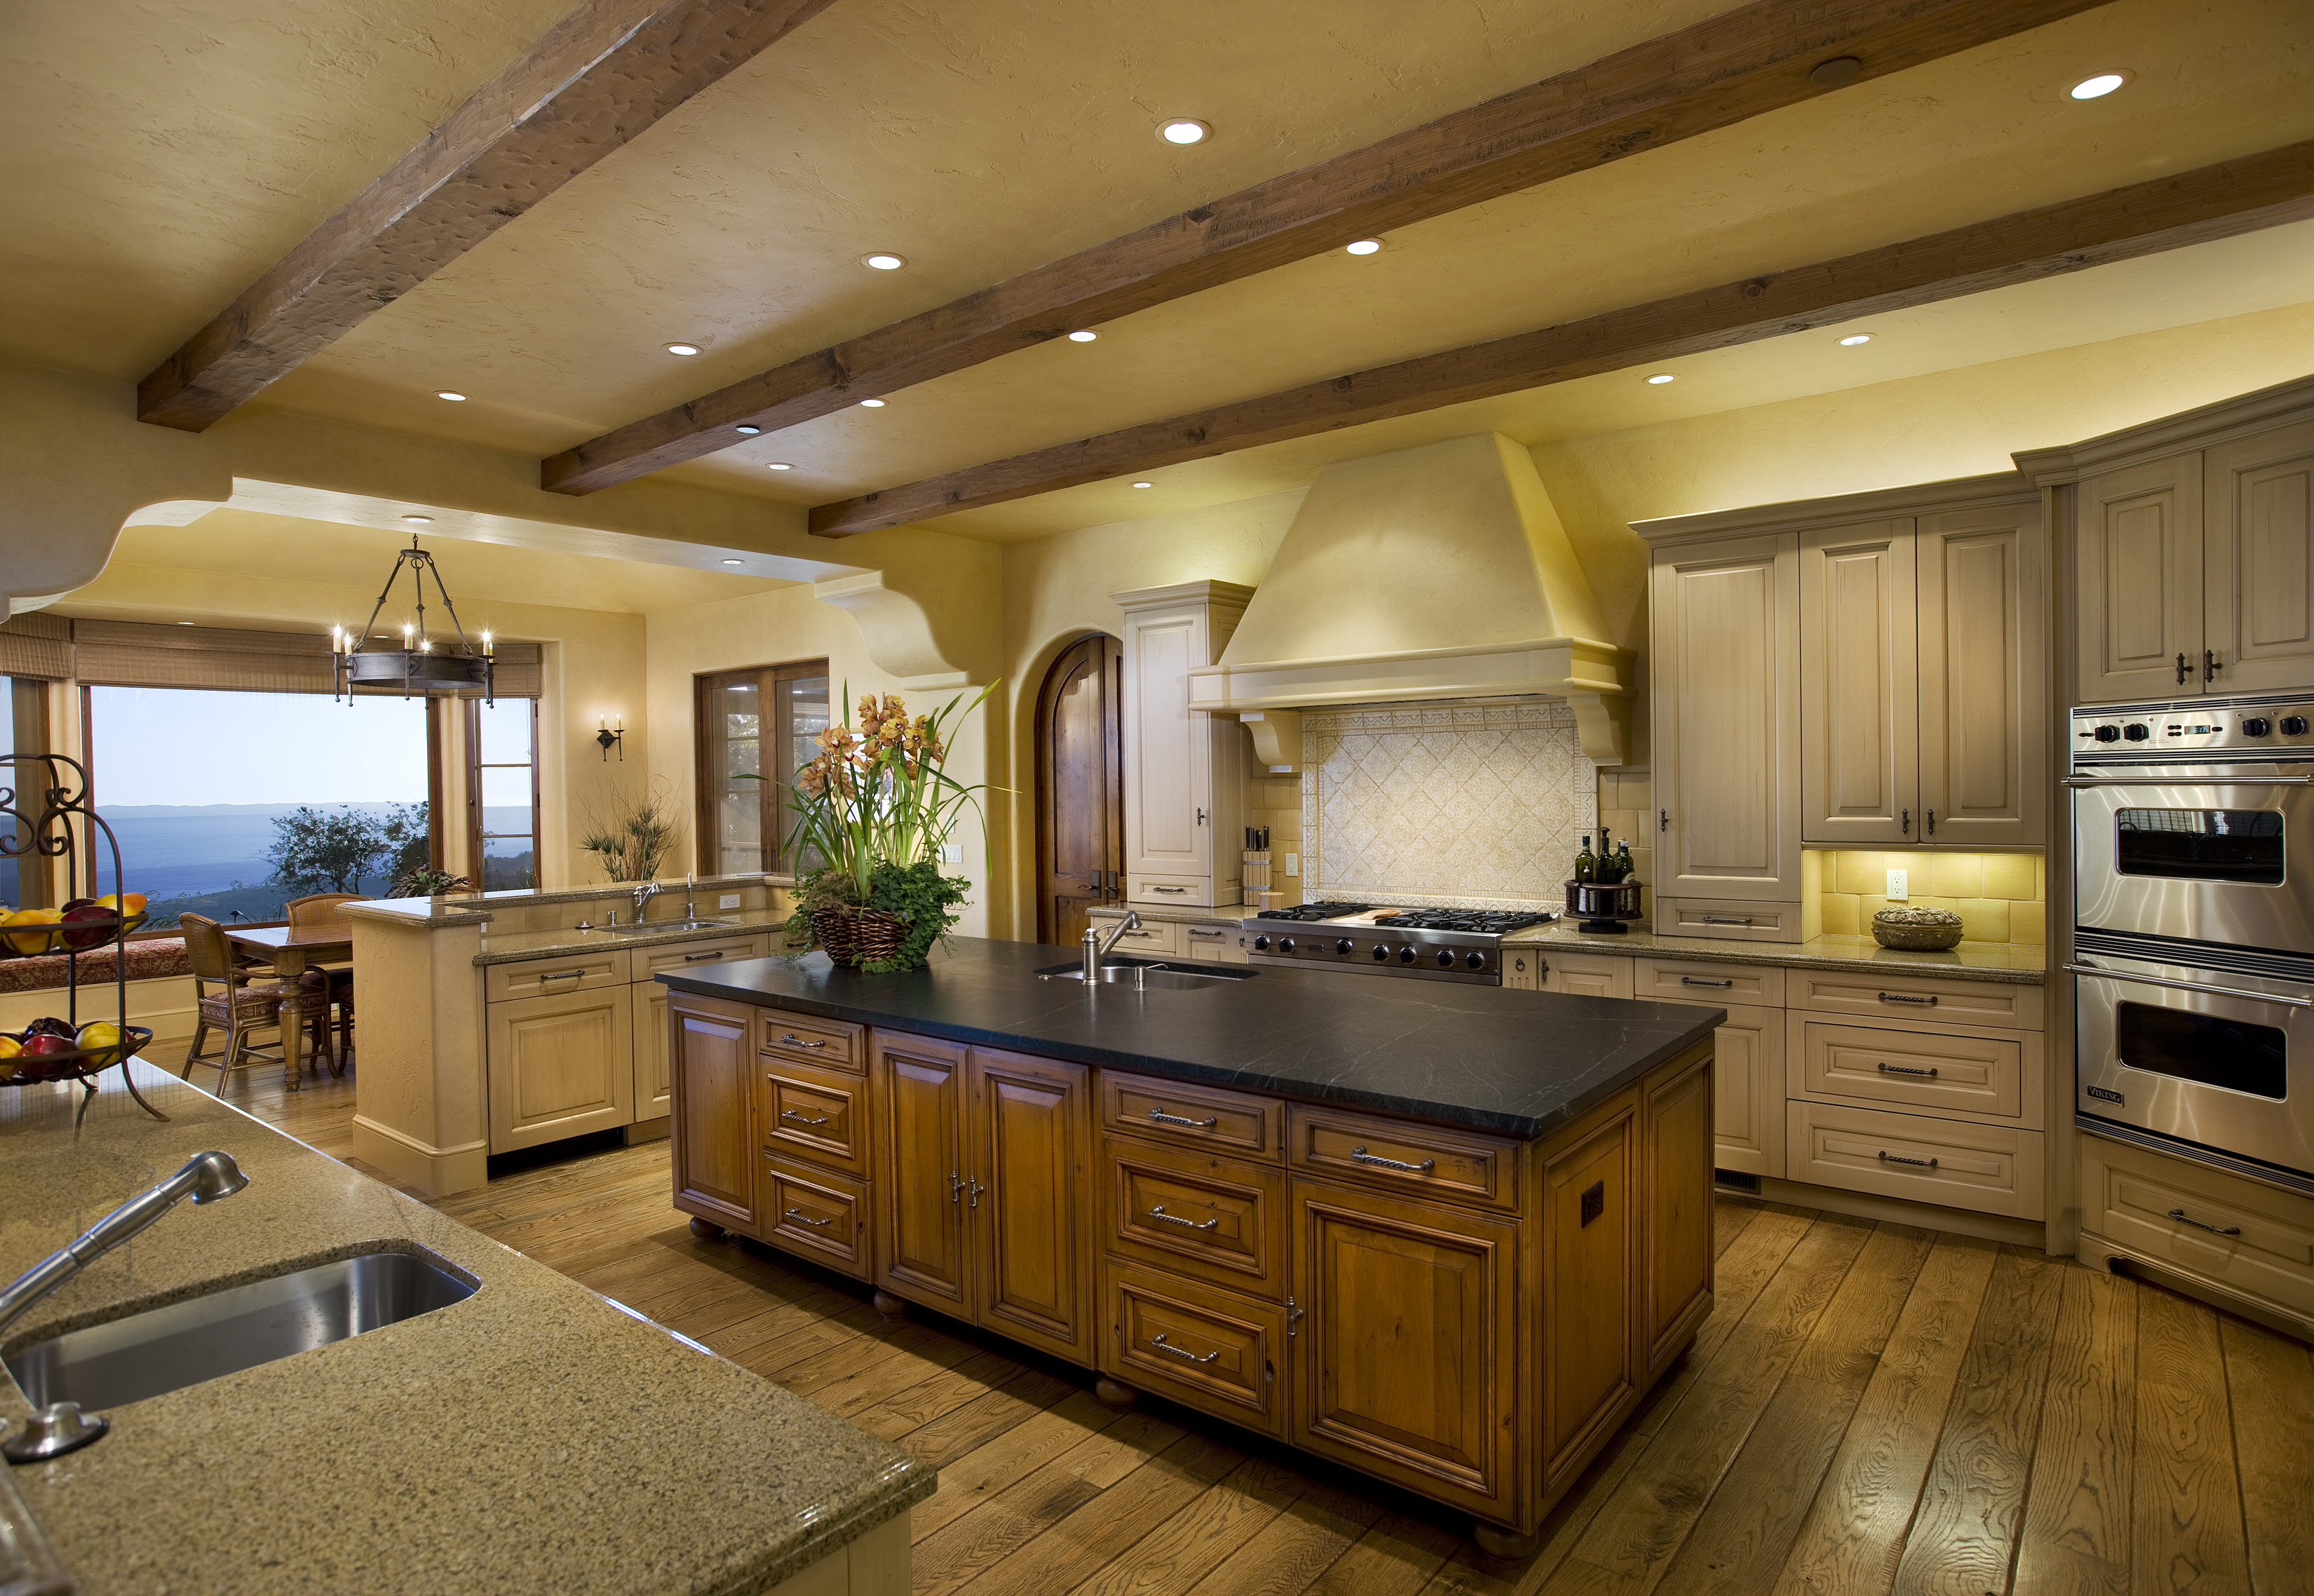 25 Images Pictures Of Beautiful Kitchens - HOME DECOR VIRAL NEWS